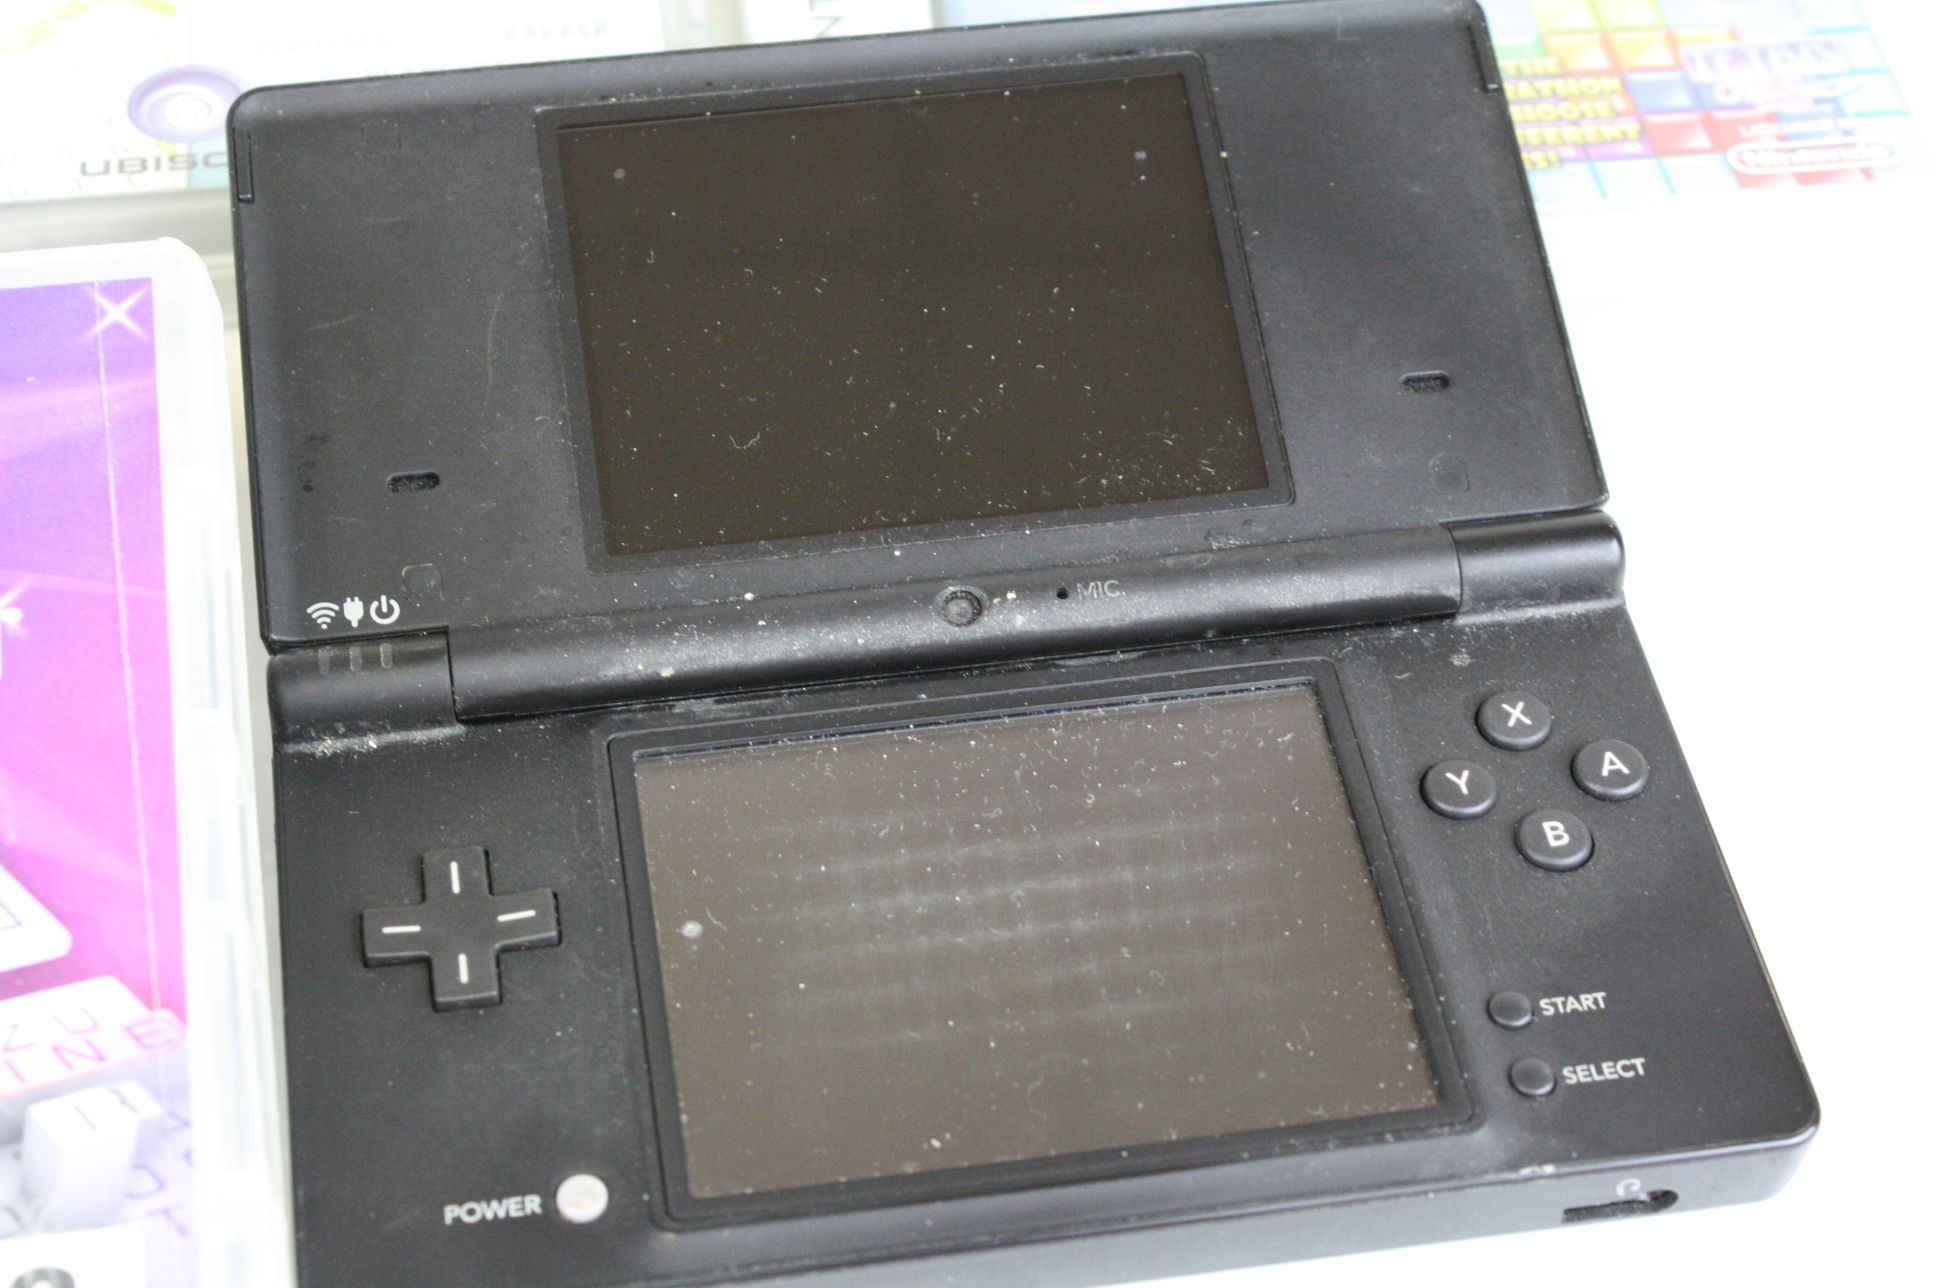 A Nintendo DS handheld games console together with a selection of games. - Image 5 of 6